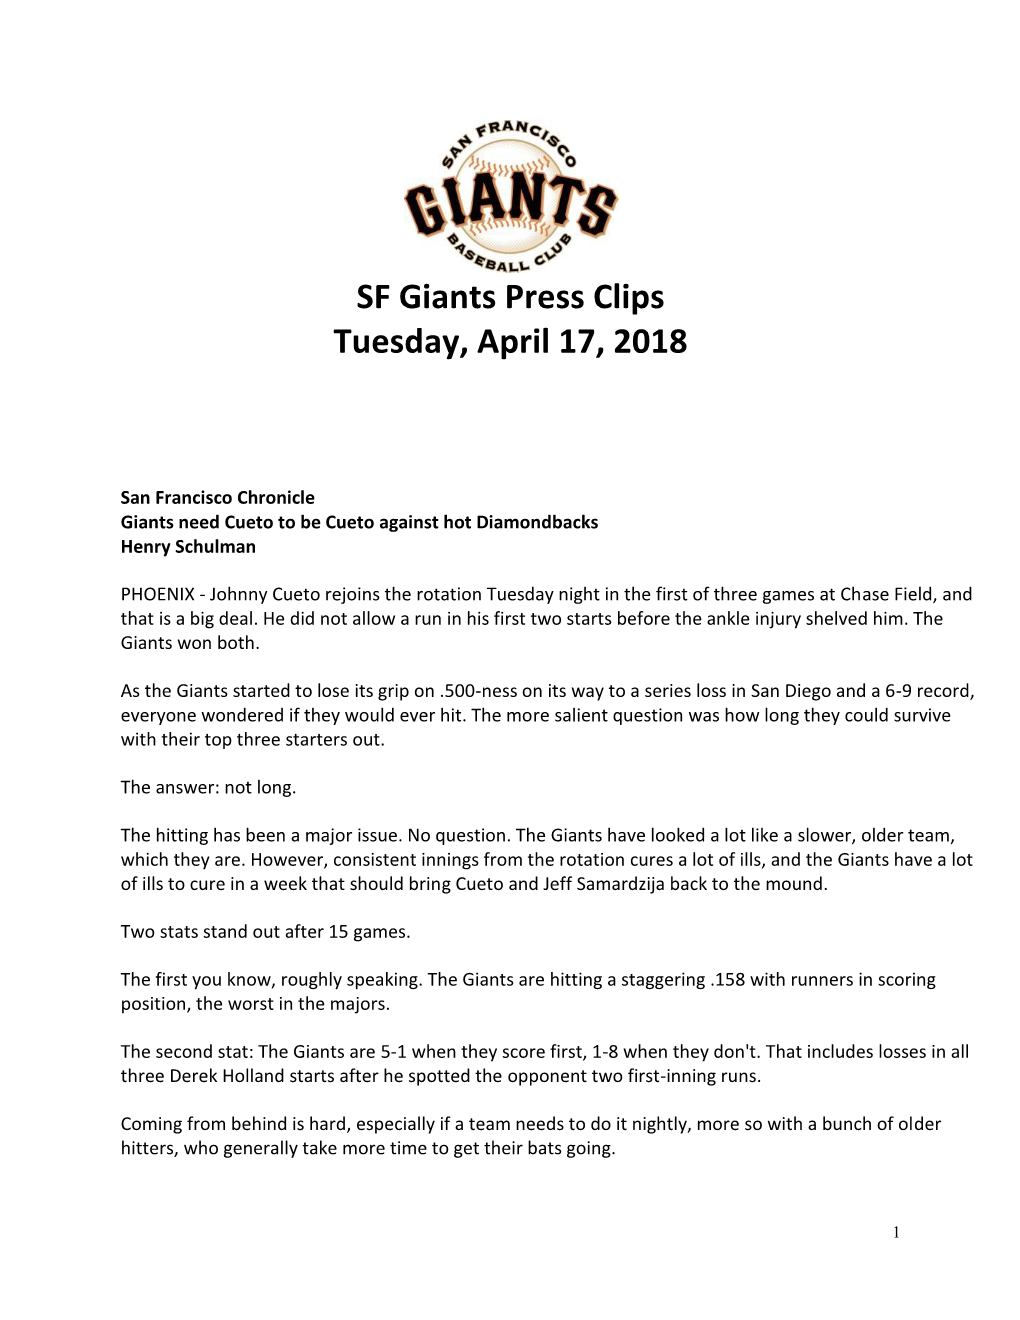 SF Giants Press Clips Tuesday, April 17, 2018